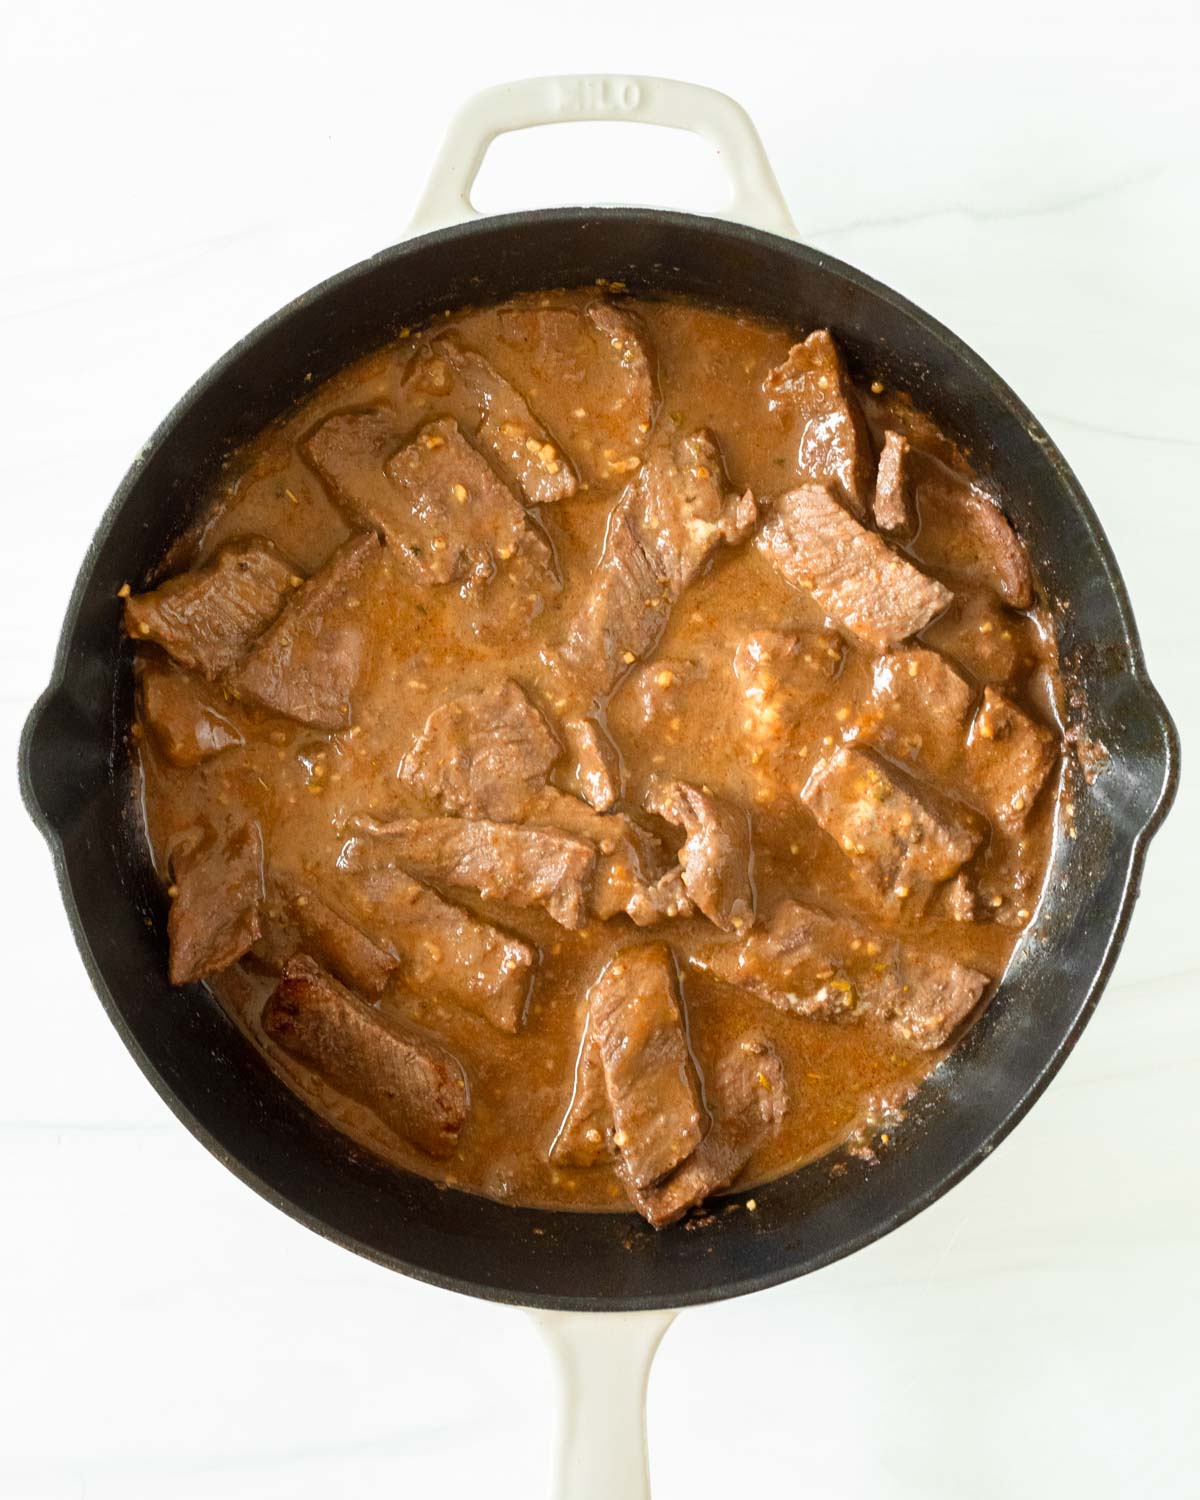 Step 5. Pour the fajita sauce into the skillet to coat the steak